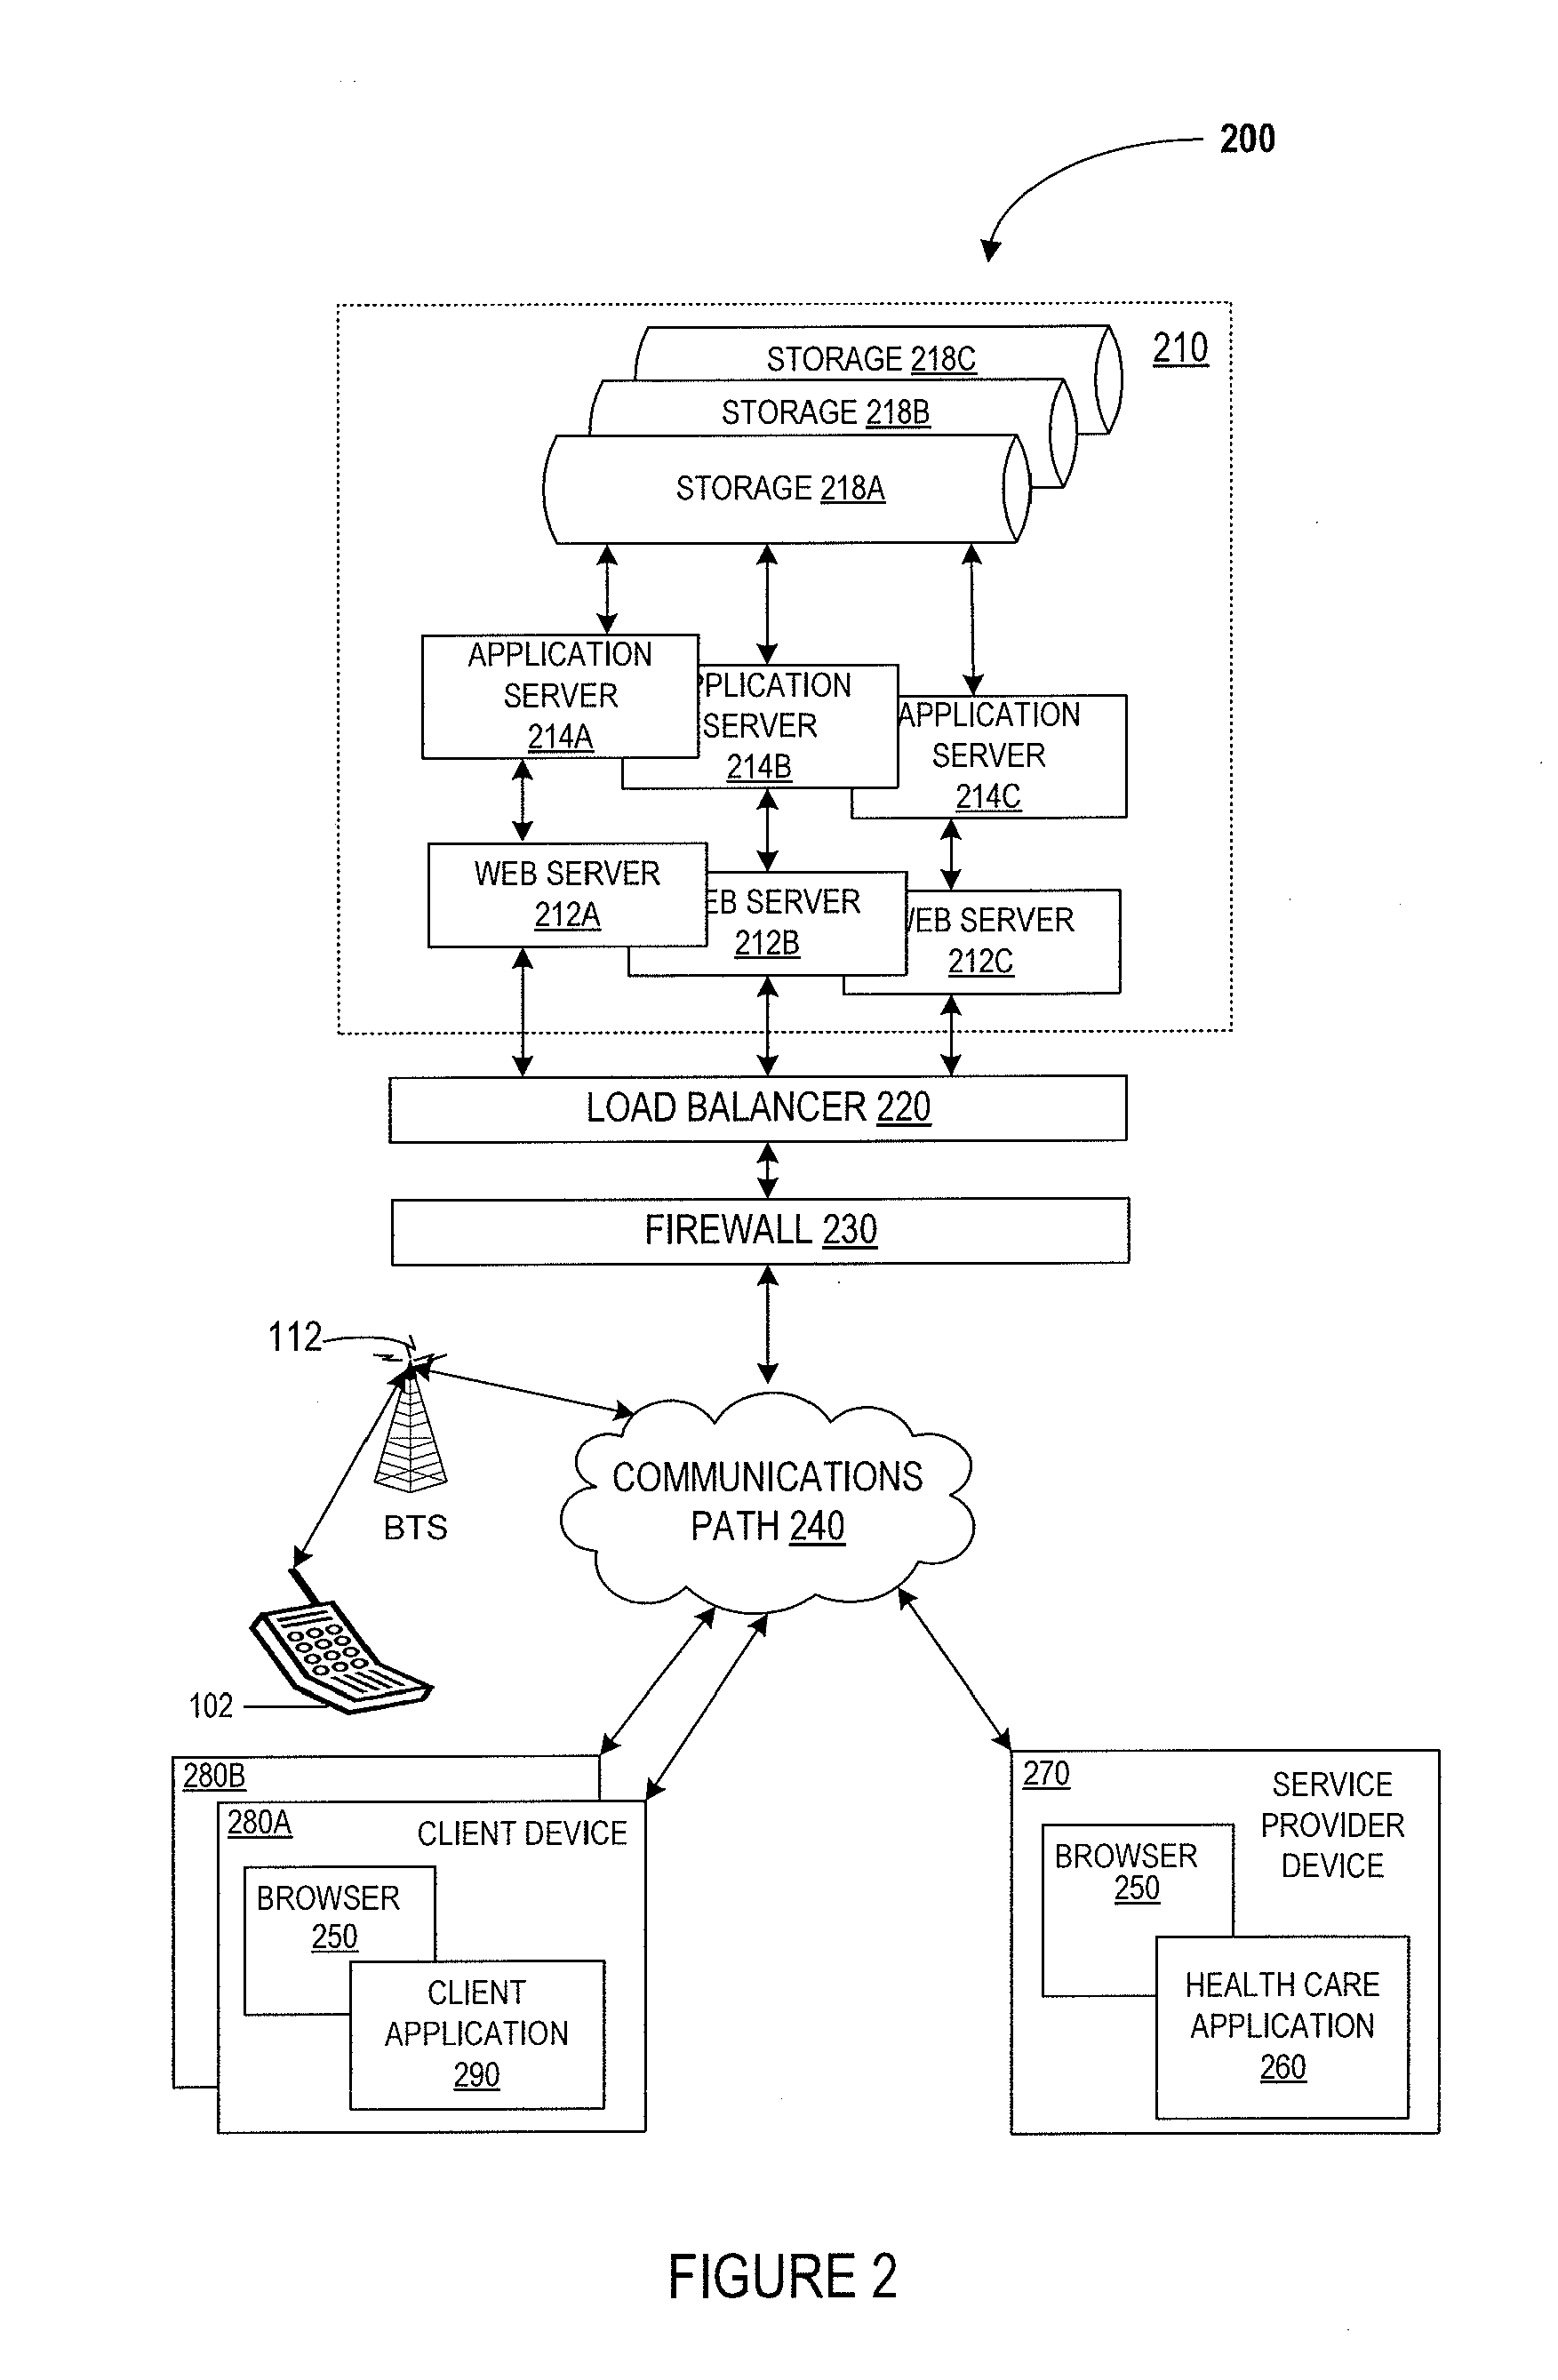 System and method for patient self-assessment or treatment compliance